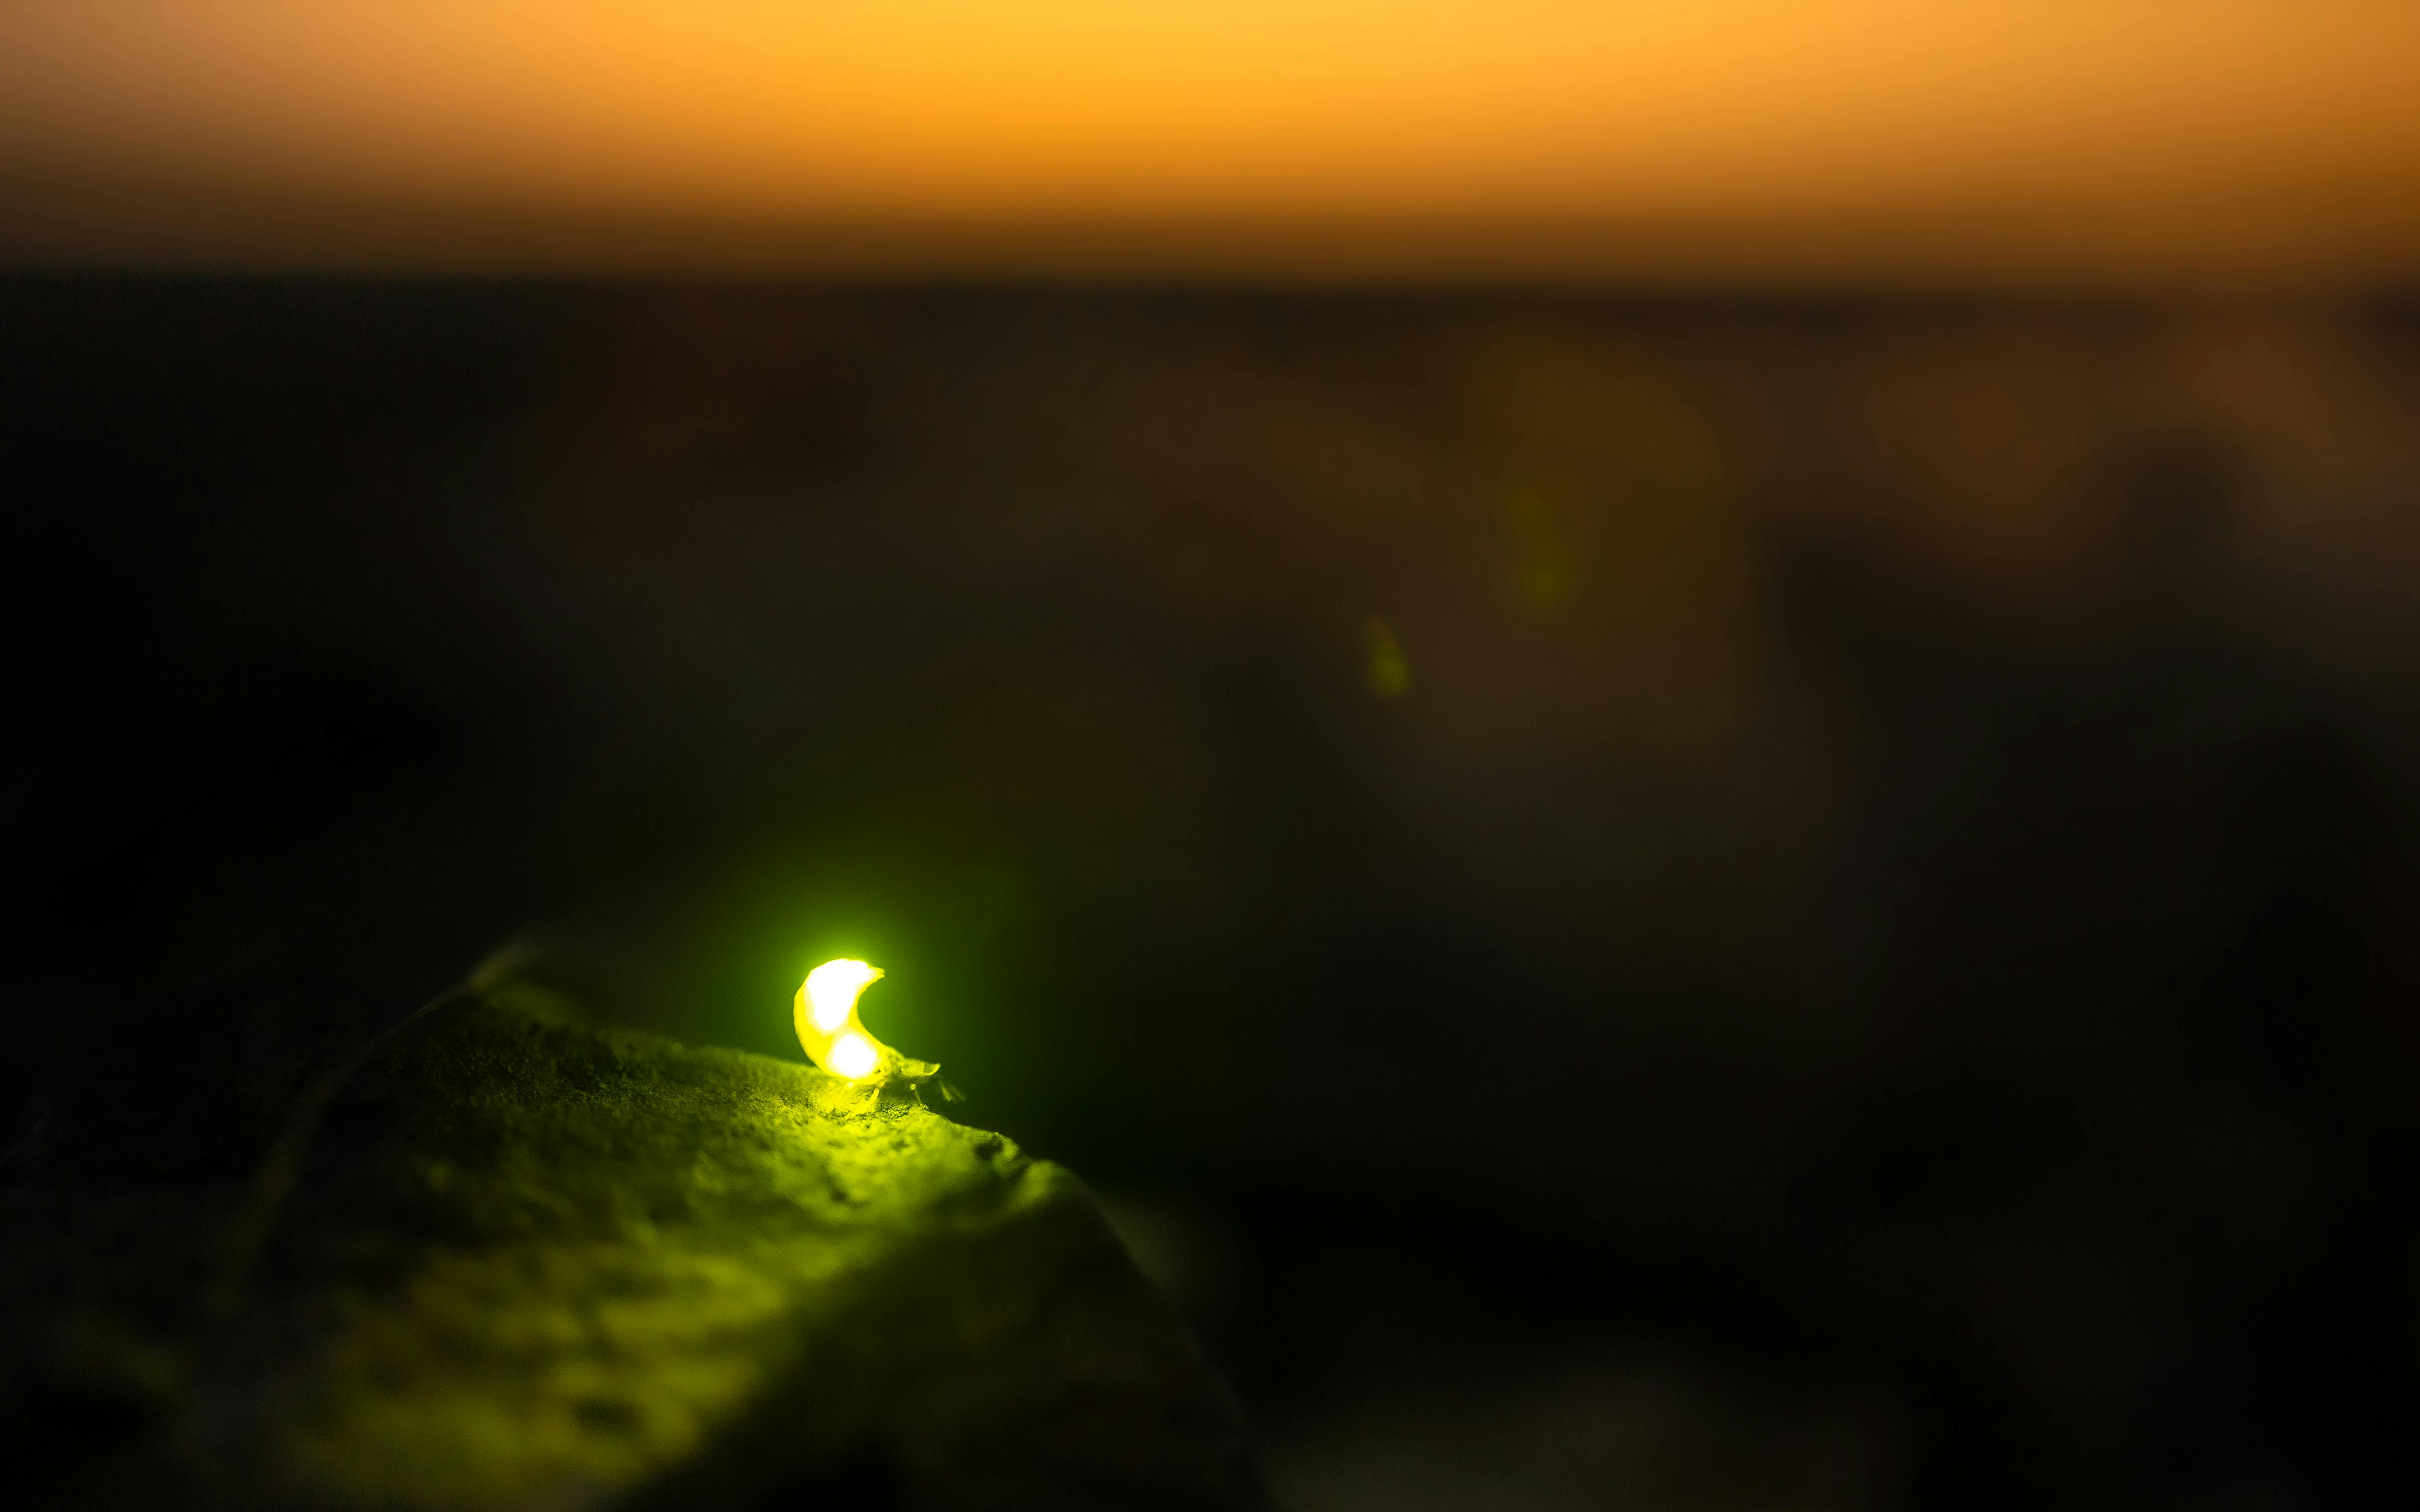 Firefly Photos Download The BEST Free Firefly Stock Photos  HD Images